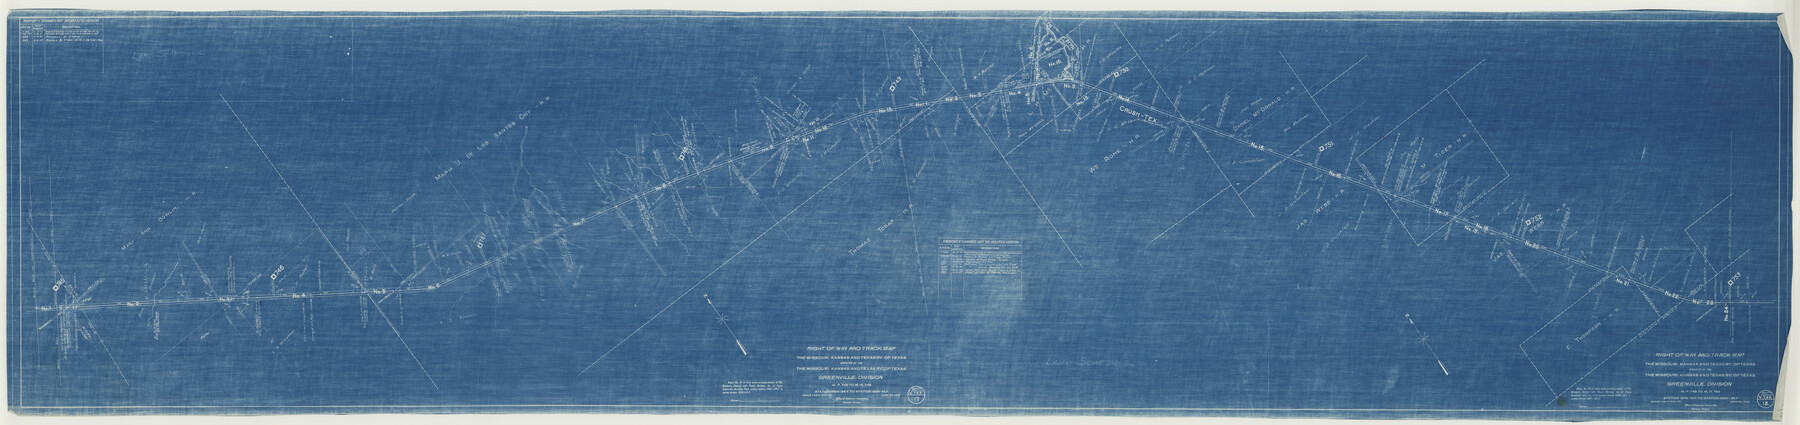 64531, Right of Way and Track Map of The Missouri, Kansas & Texas Railway of Texas, General Map Collection